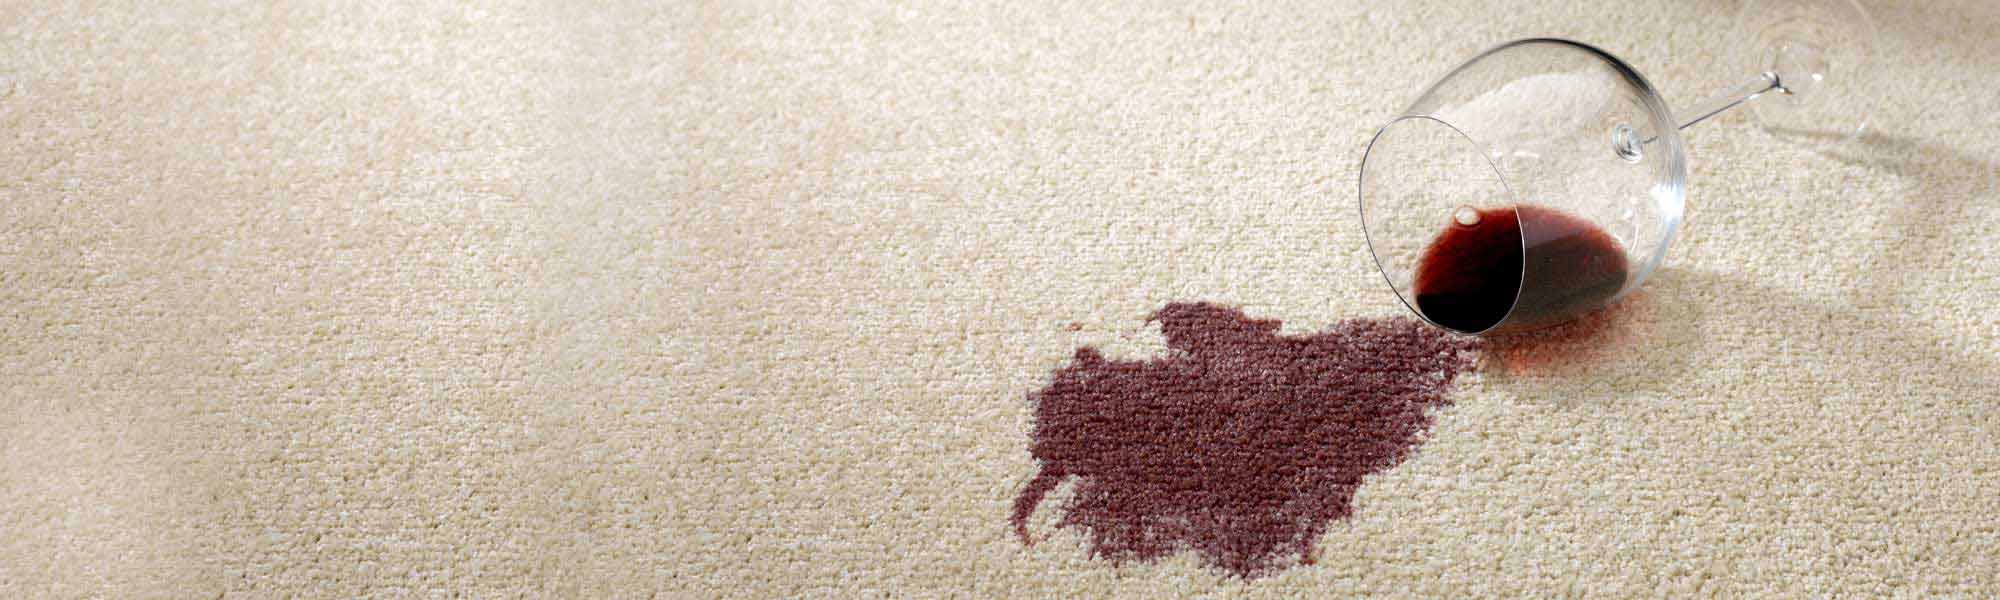 Professional Stain Removal Service by Hearth & Home Chem-Dry